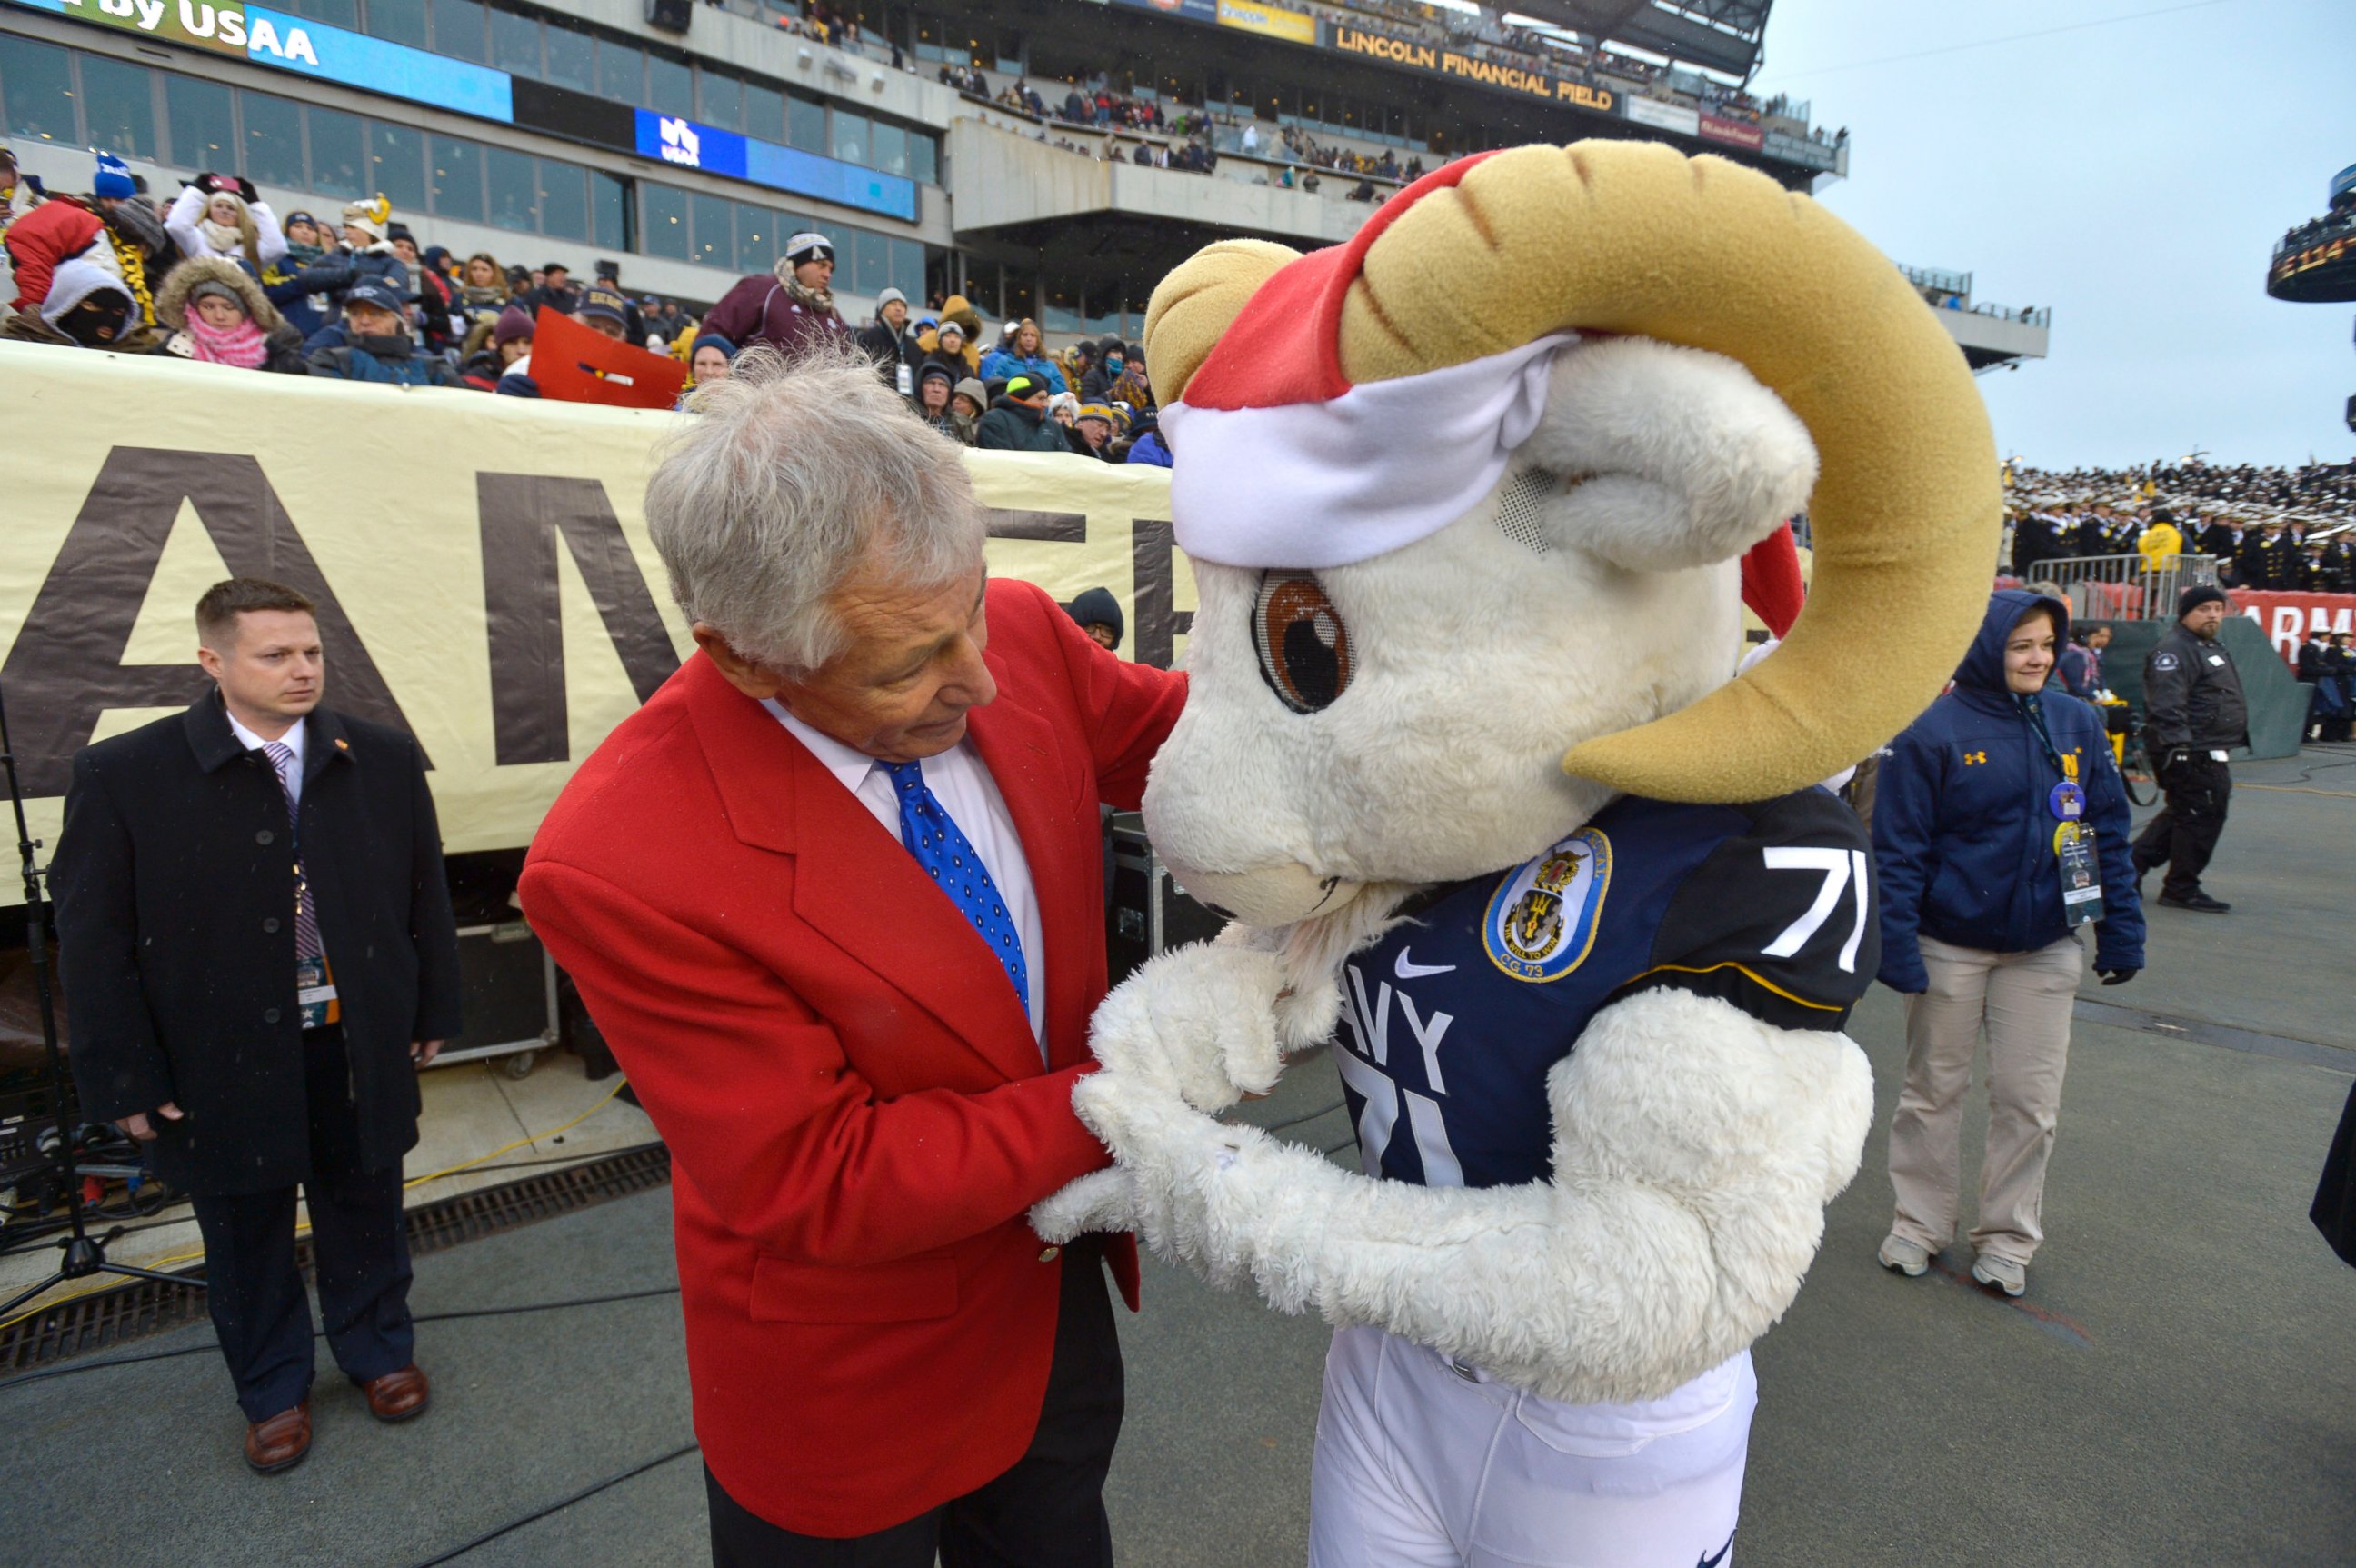 PHOTO: Secretary of Defense Chuck Hagel chats with the Navy mascot on the sidelines of the Army vs. Navy game in Philadelphia, Pa. on Dec. 14, 2013.